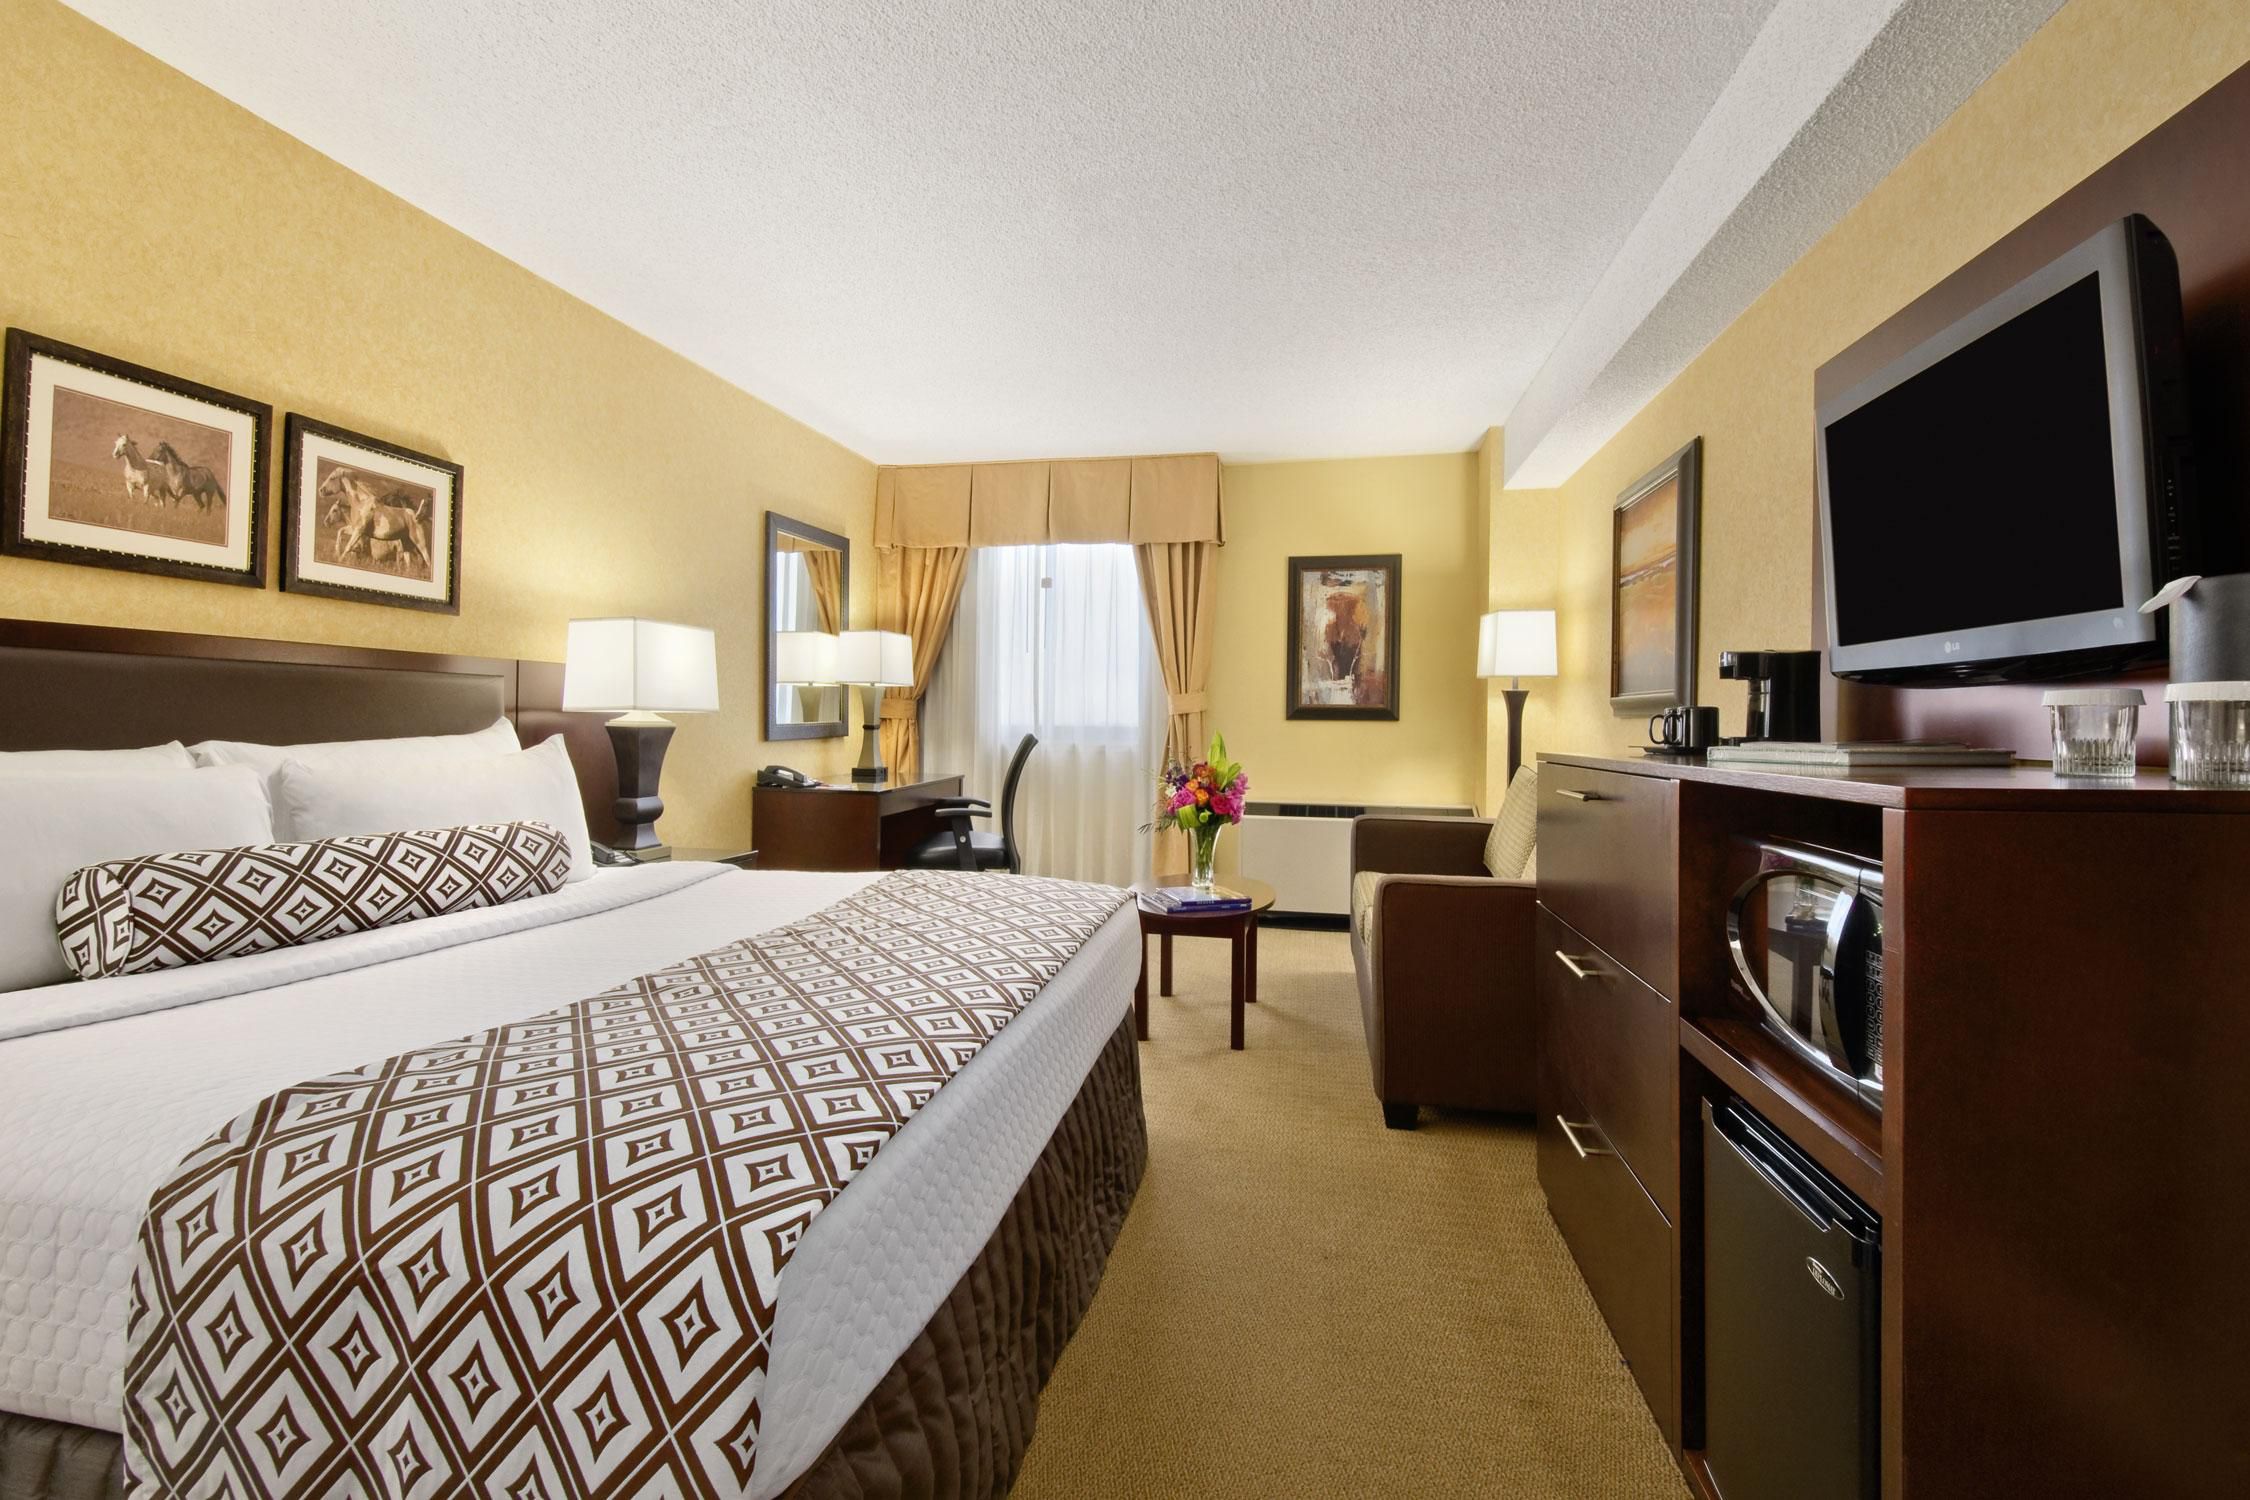 Make yourself at home in our King Bed Guest Rooms